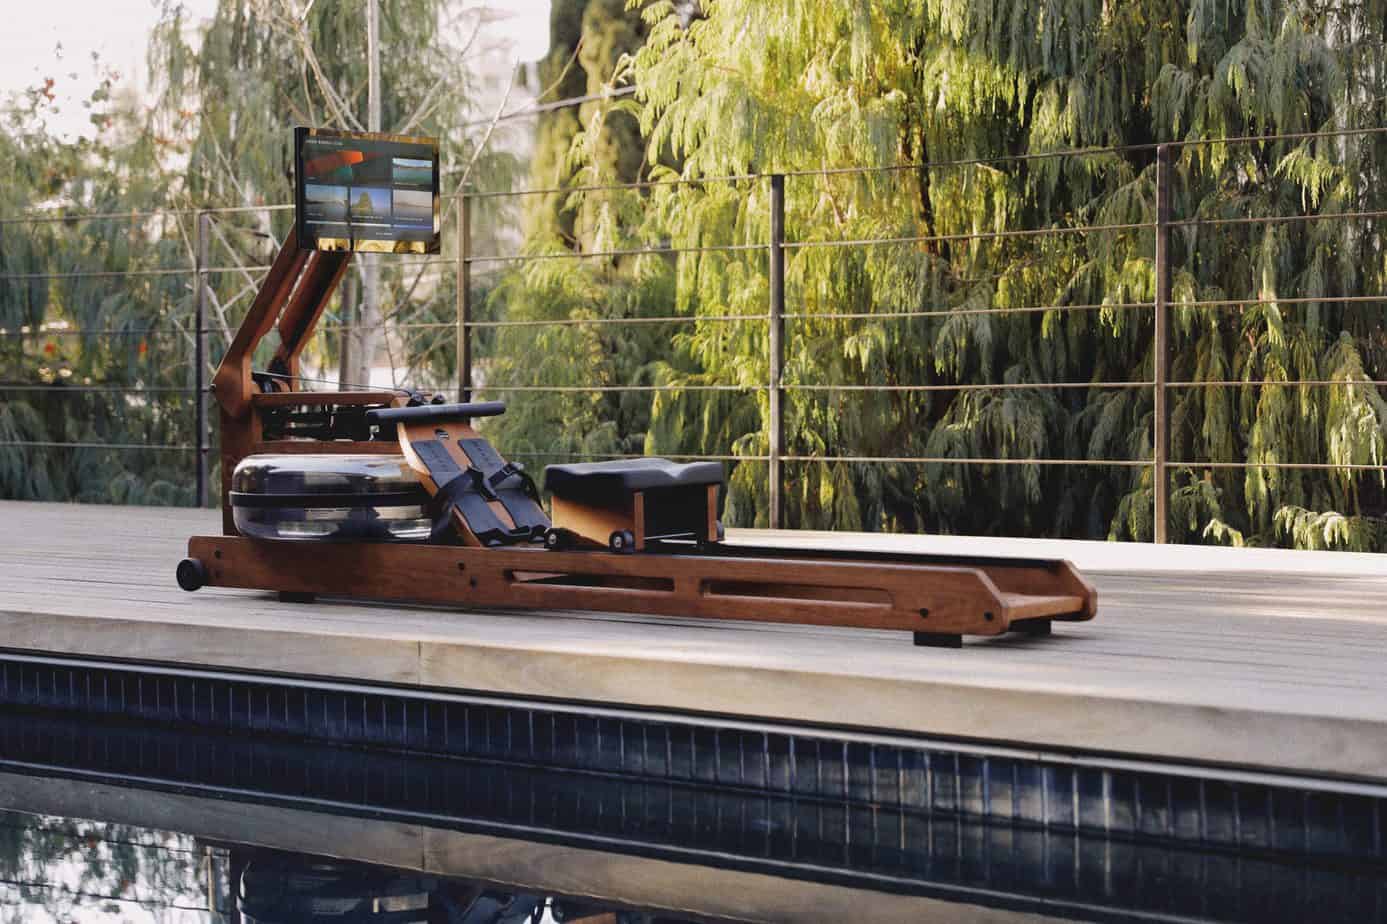 Ergatta outside on wooden deck by pool